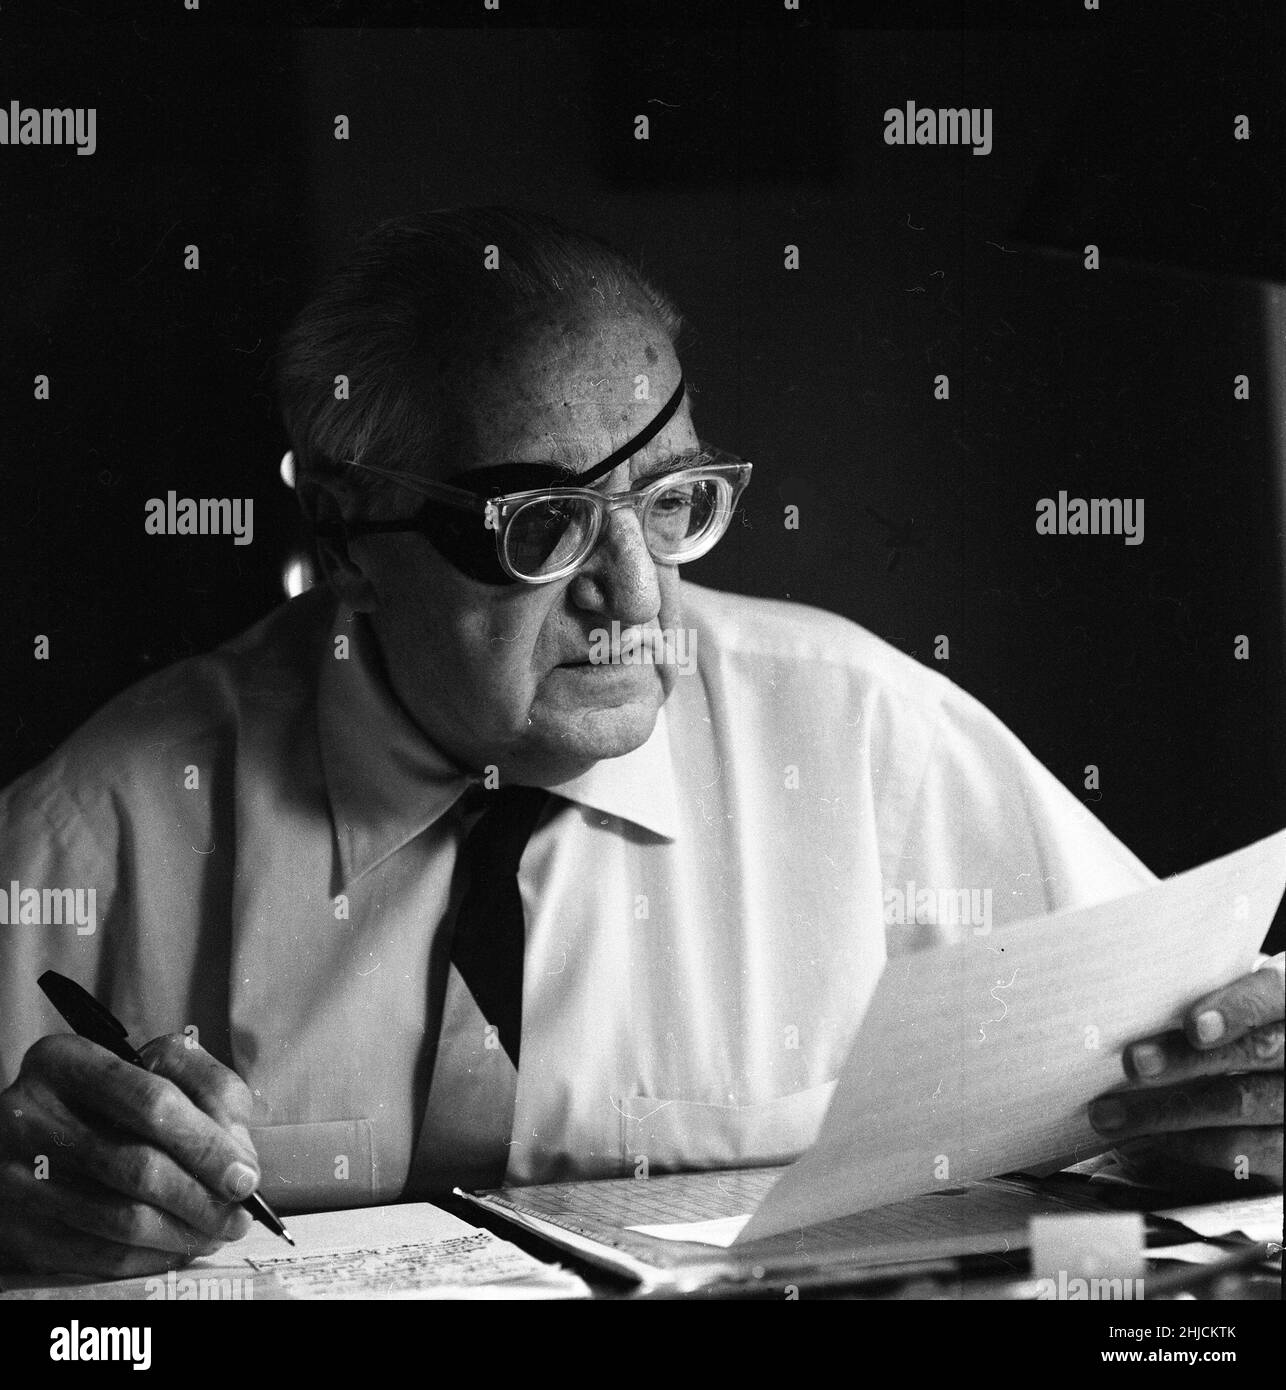 Fritz Lang (1890-1976) in Beverly Hills, 1965. Lang was a Austrian filmmaker, screenwriter, and occasional film producer and actor. One of the best known √©migr√©s from Germany's school of Expressionism, he was dubbed the 'Master of Darkness' by the British Film Institute. His most famous films include the groundbreaking Metropolis (the world's most expensive silent film at the time of its release), and M, made before he moved to the United States, which is considered the precursor to the film noir genre. Stock Photo